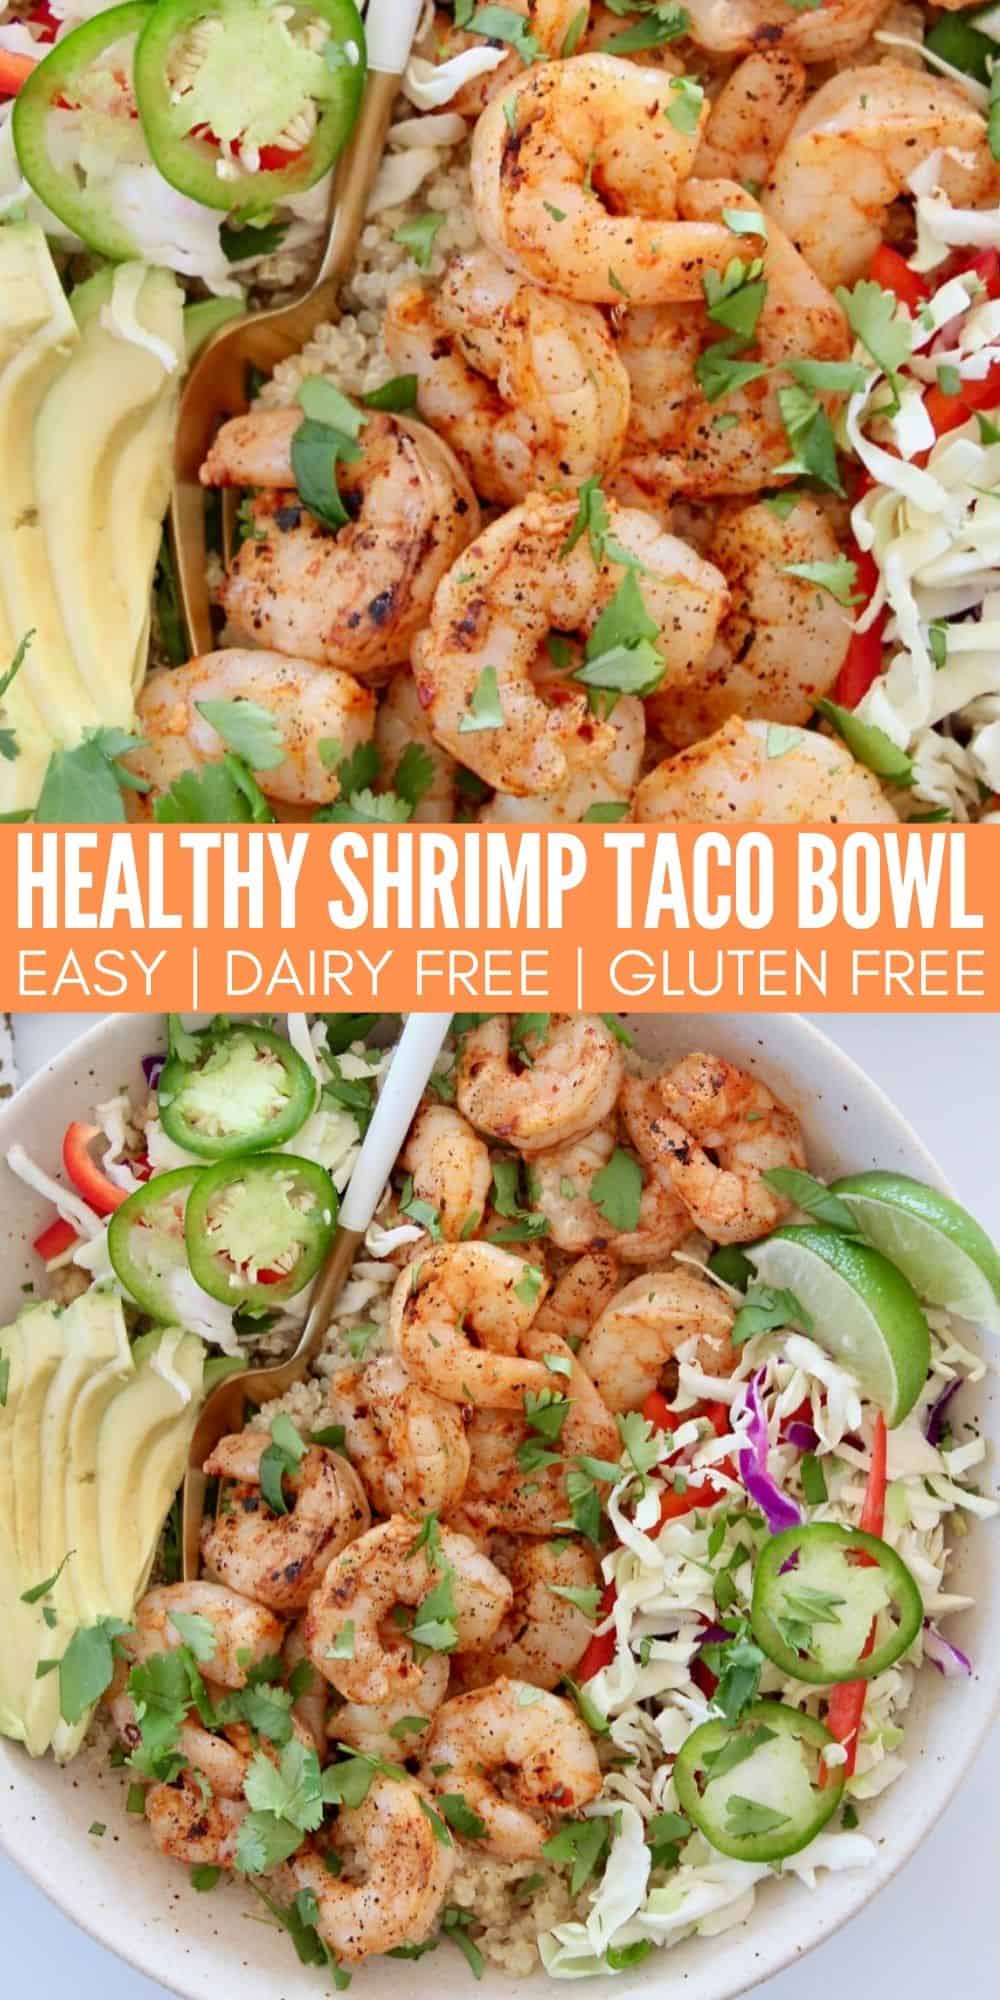 Shrimp Taco Bowl with Chipotle Sauce - Bowls Are The New Plates